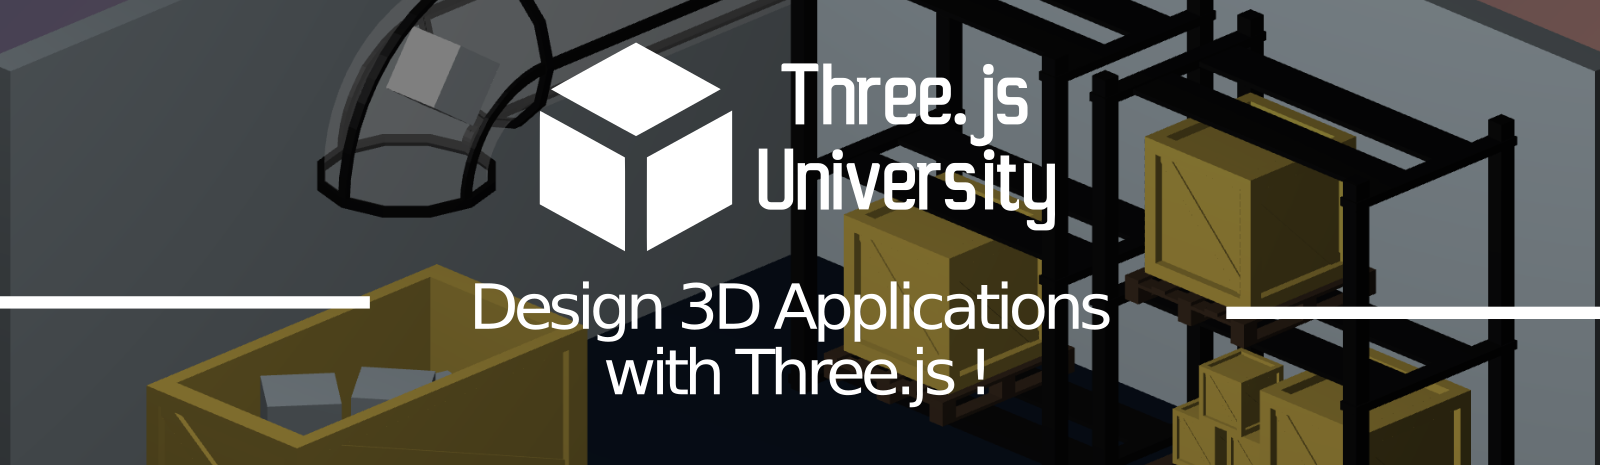 Discover Three.js